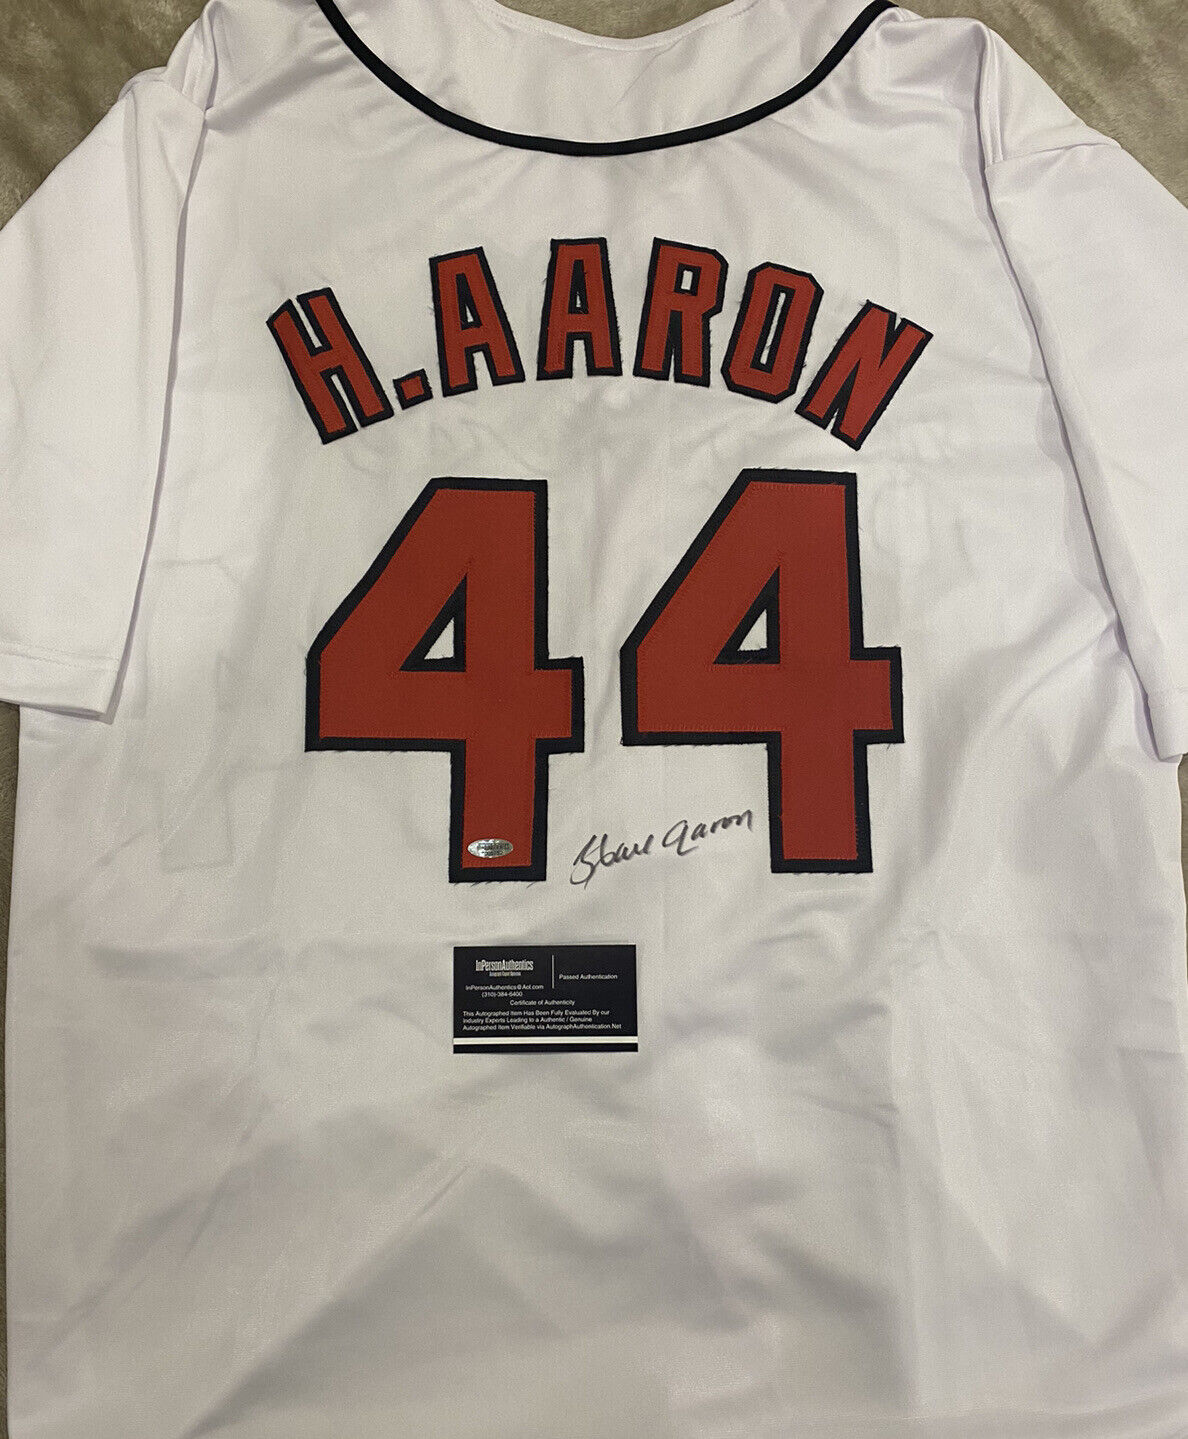 Hank Aaron Signed Jersey - Authenticated